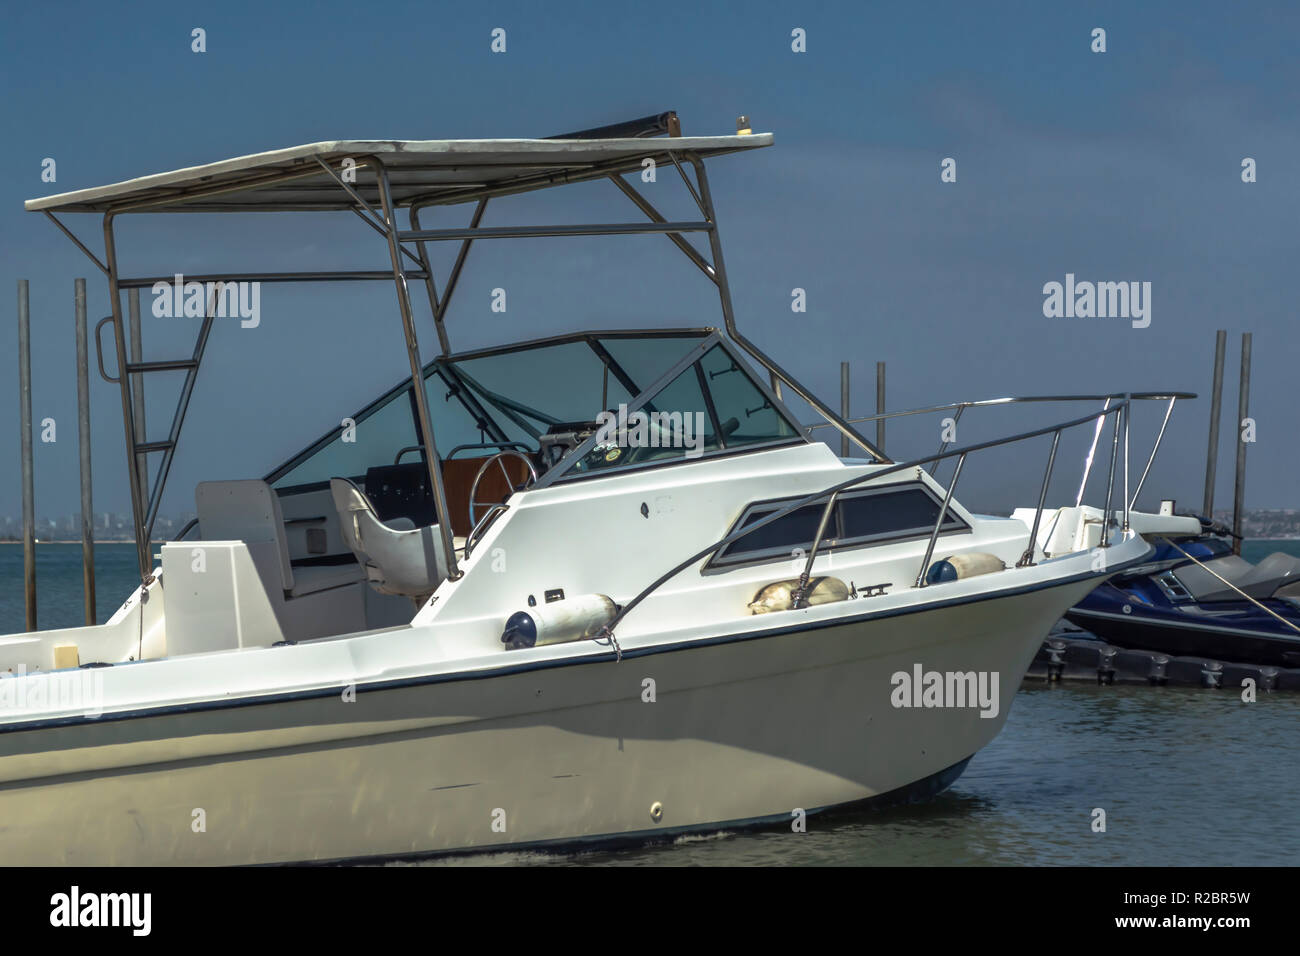 General exterior view of private recreational boat, parked at the beach in Mussulo island, Angola Stock Photo